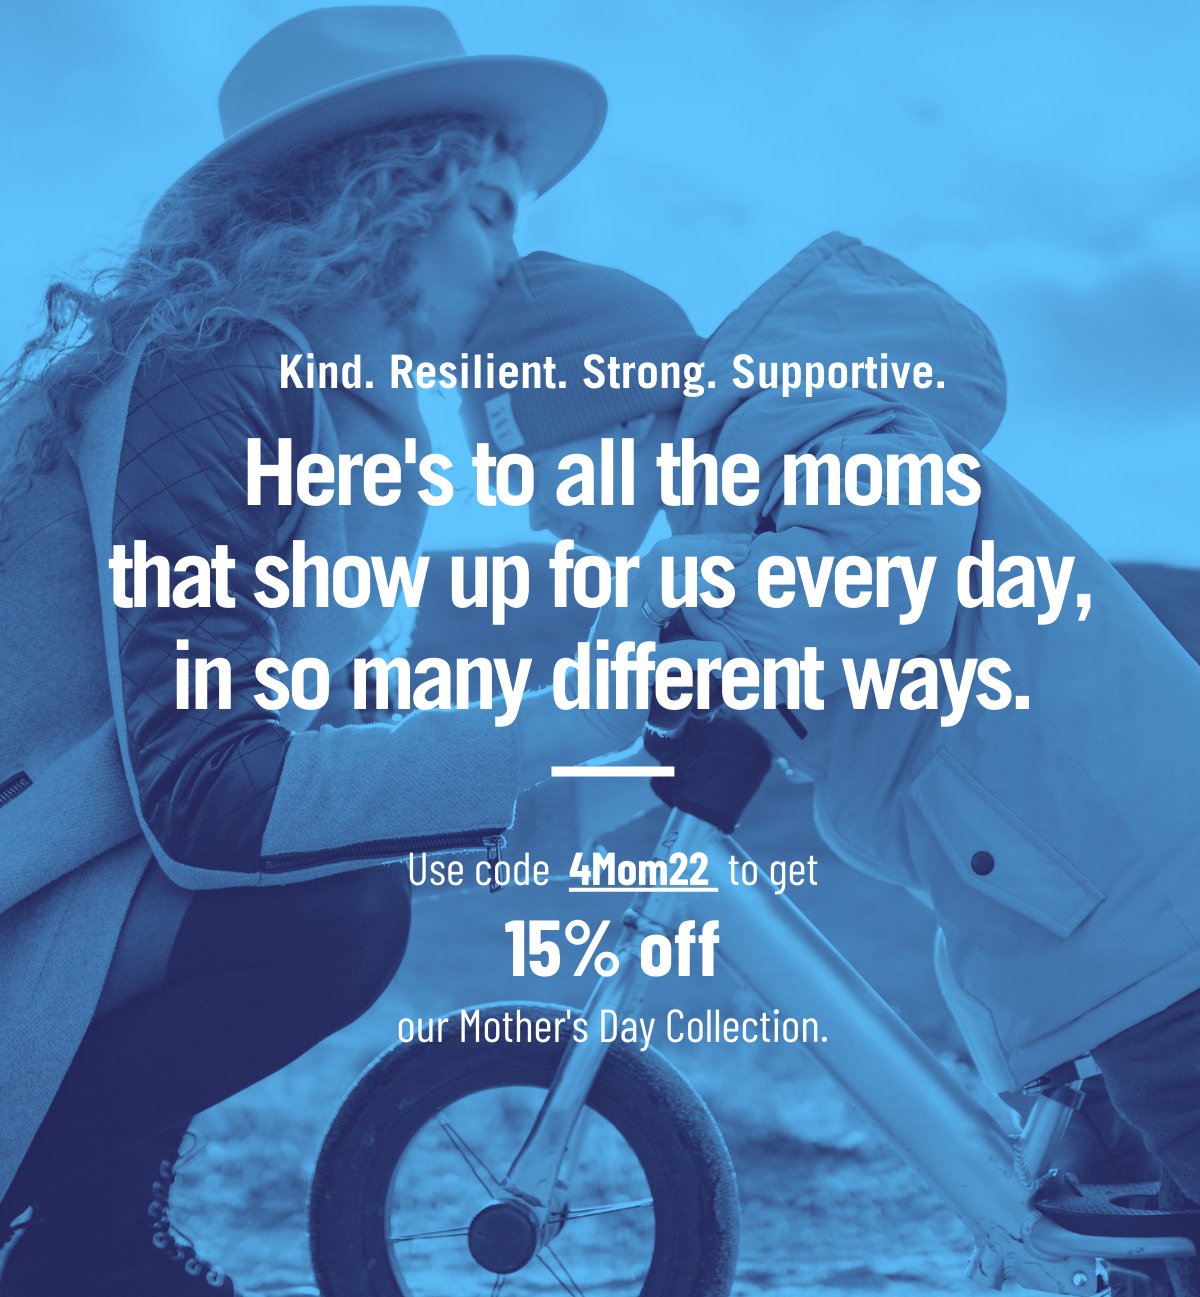 Kind. Resilient. Strong. Supportive. Here's to all the moms that show up for us every day, in so many different ways. Use code 4Mom22 to get 15% off.